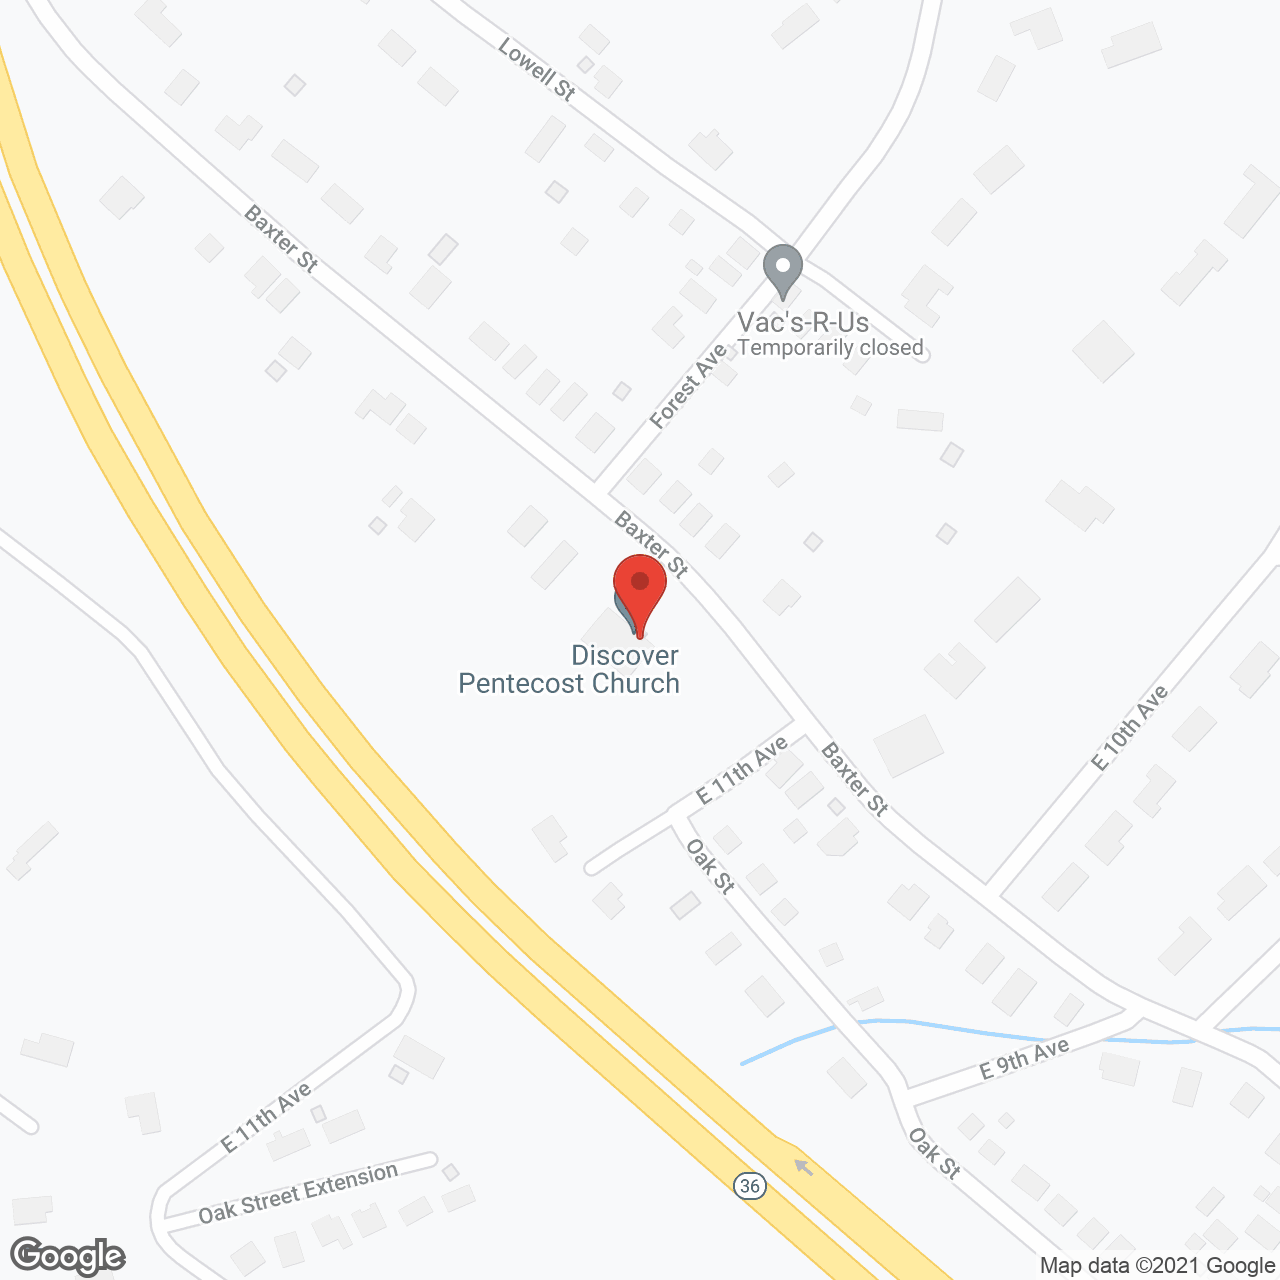 Princeton Transitional Care and Assisted Living in google map